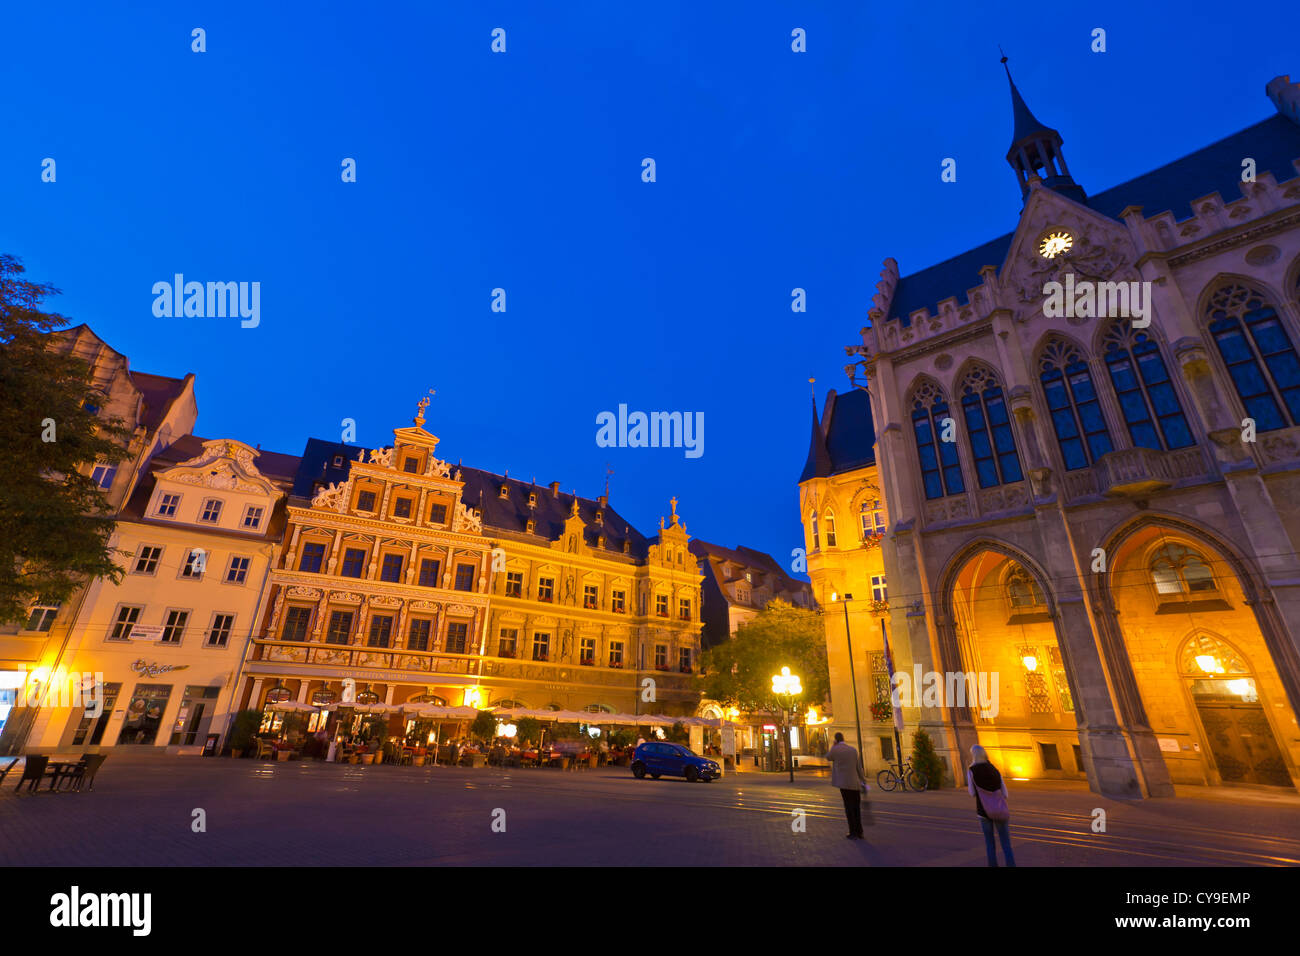 RESTAURANTS, TOWN HALL, GUILDHALL, FISCHMARKT SQUARE, HISTORIC CENTRE, ERFURT, THURINGIA, GERMANY Stock Photo